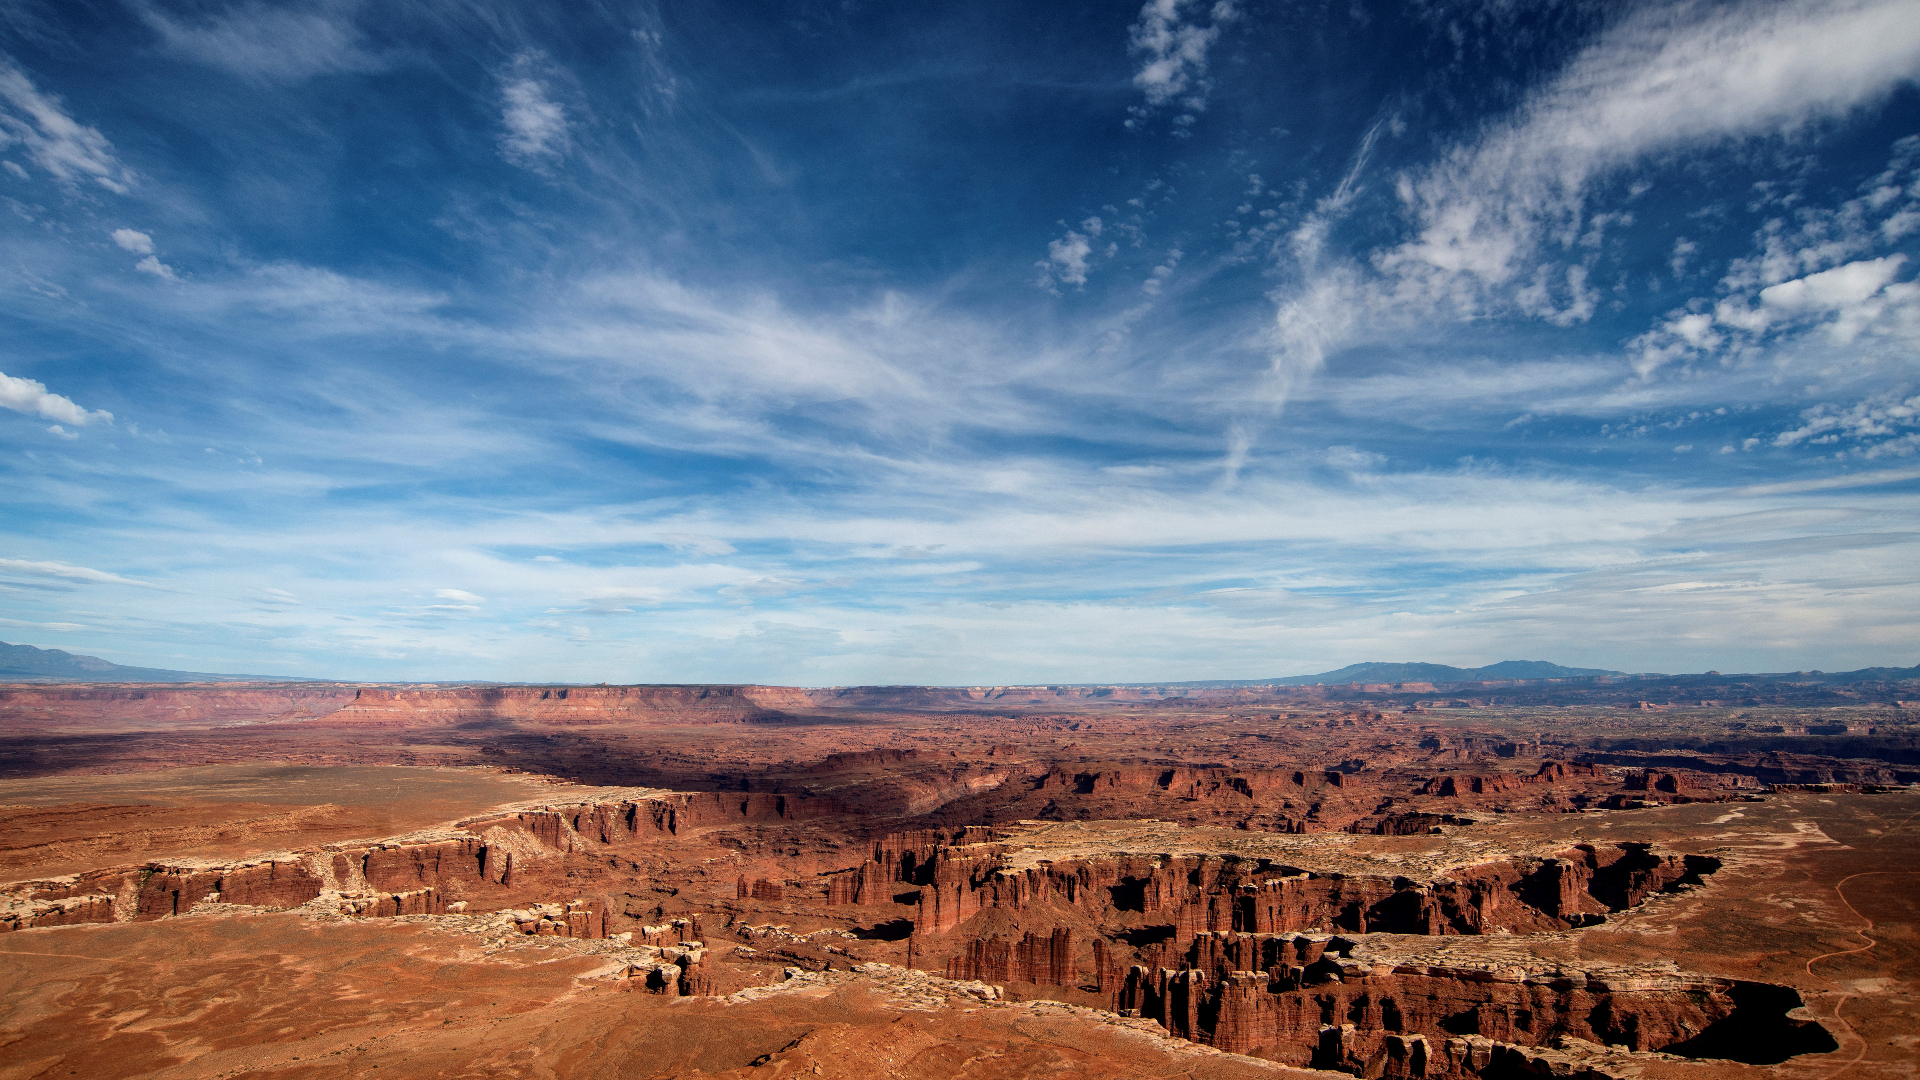 Red rock structures and canyons under a blue sky with soft white clouds.